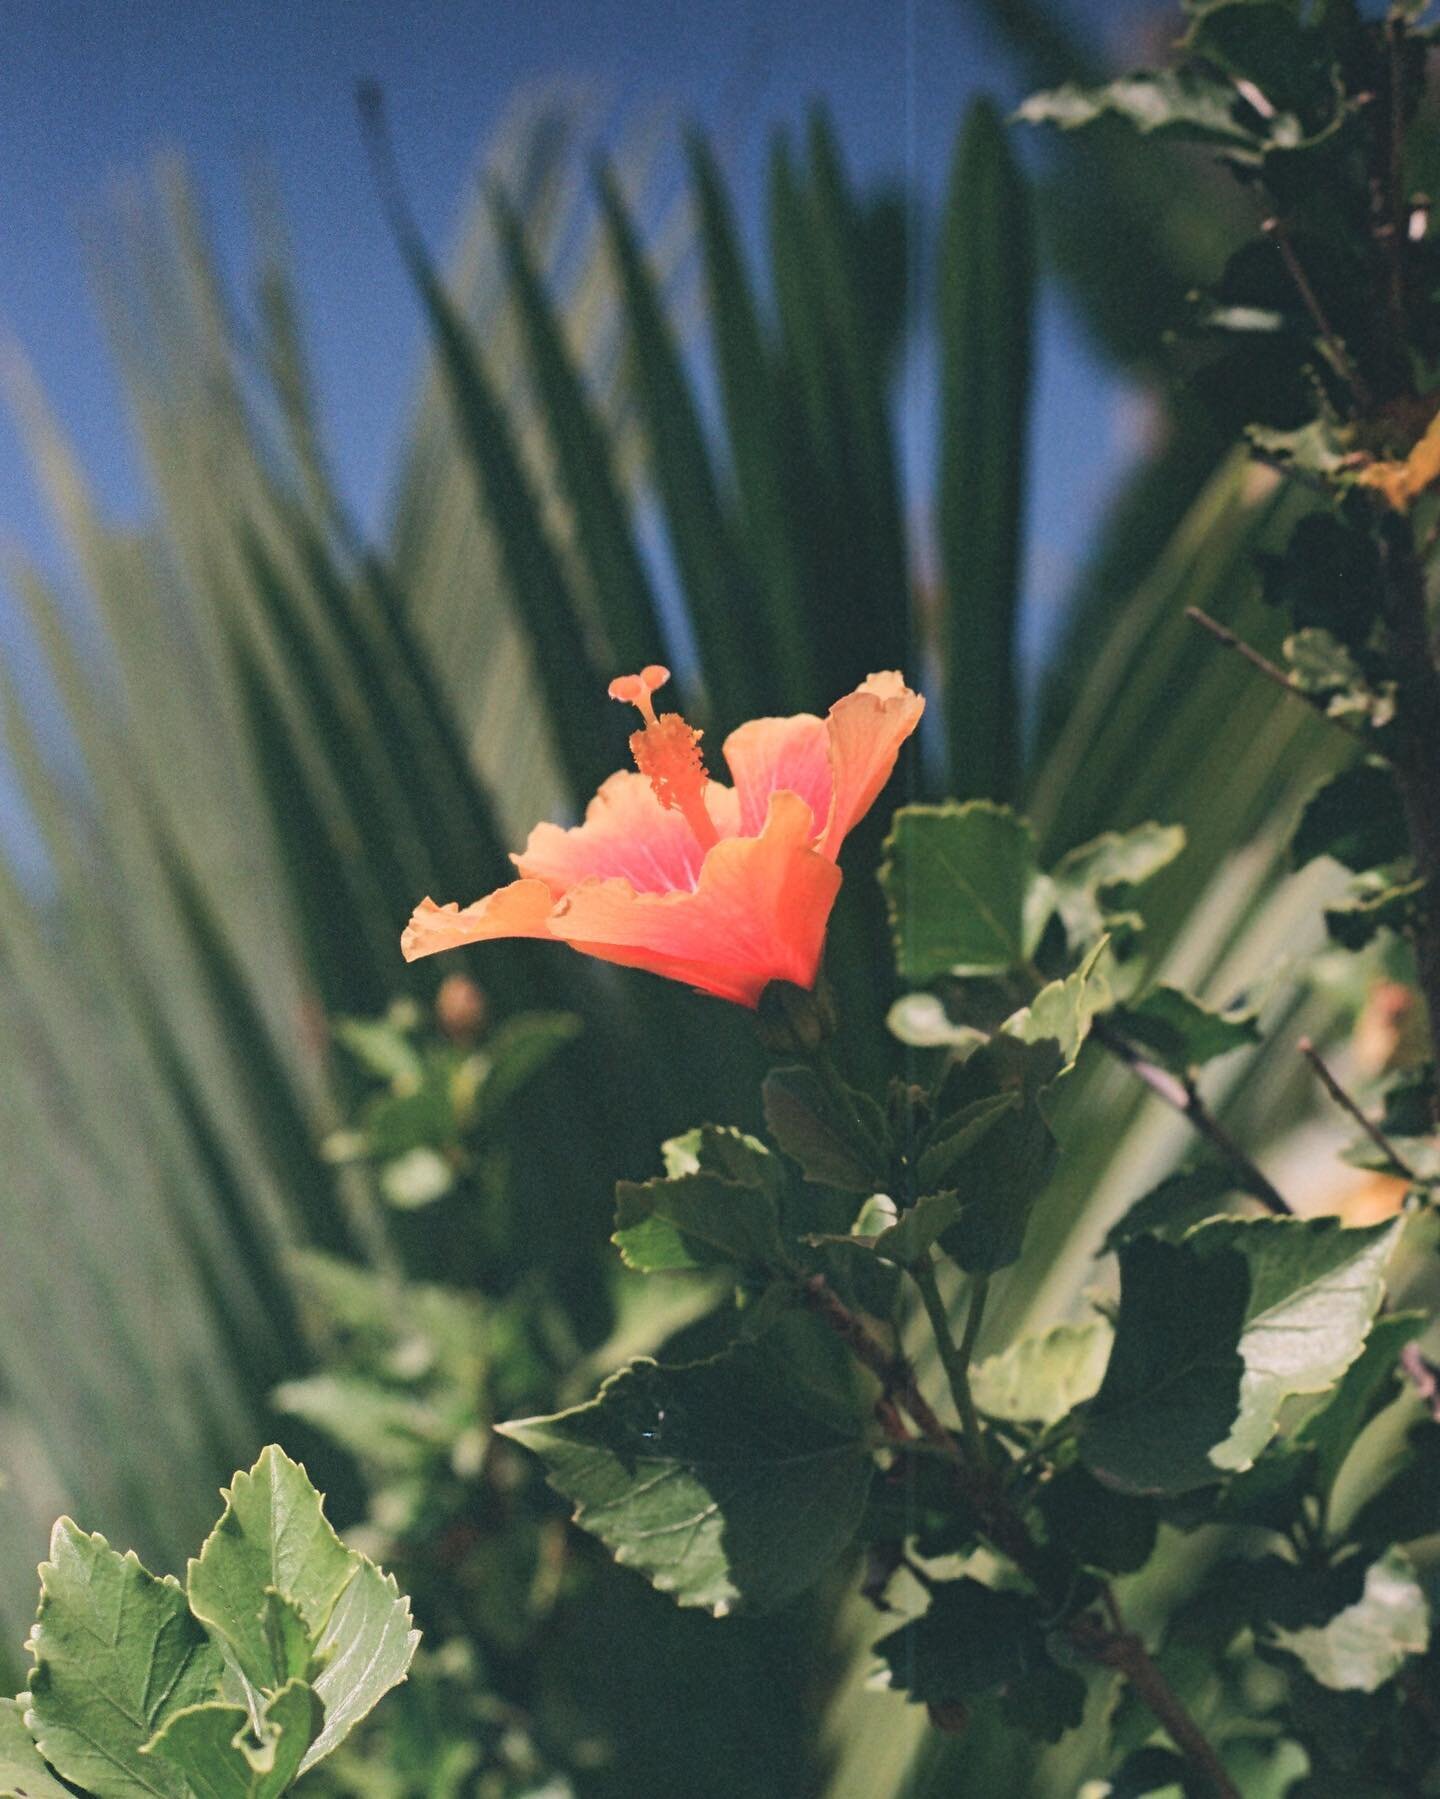 The flowers of Mexico are the most vibrant I&rsquo;ve ever seen! 🌺 🌺🌺🌺#mexico #lightleak #35mm #hibiscus #kodak #pentax #shootfilm